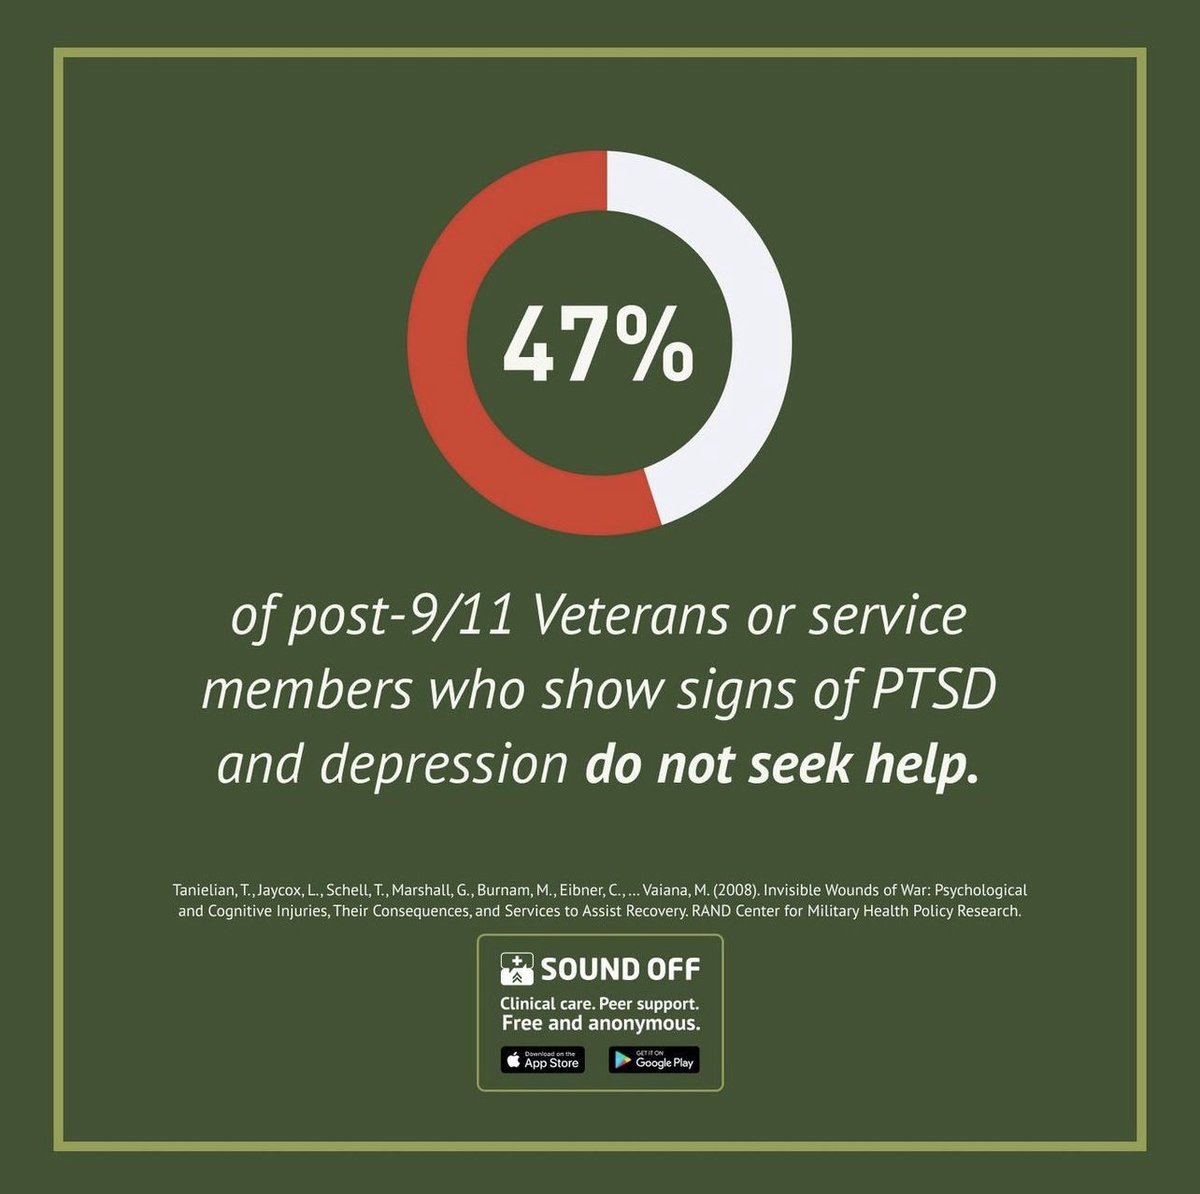 As we recognize Memorial Day, please help me support veterans. Sound Off provides free anonymous mental health support for veterans, but needs our funding help. Please consider donating at the link below. participate.carrytheload.org/site/TR/2019/G…